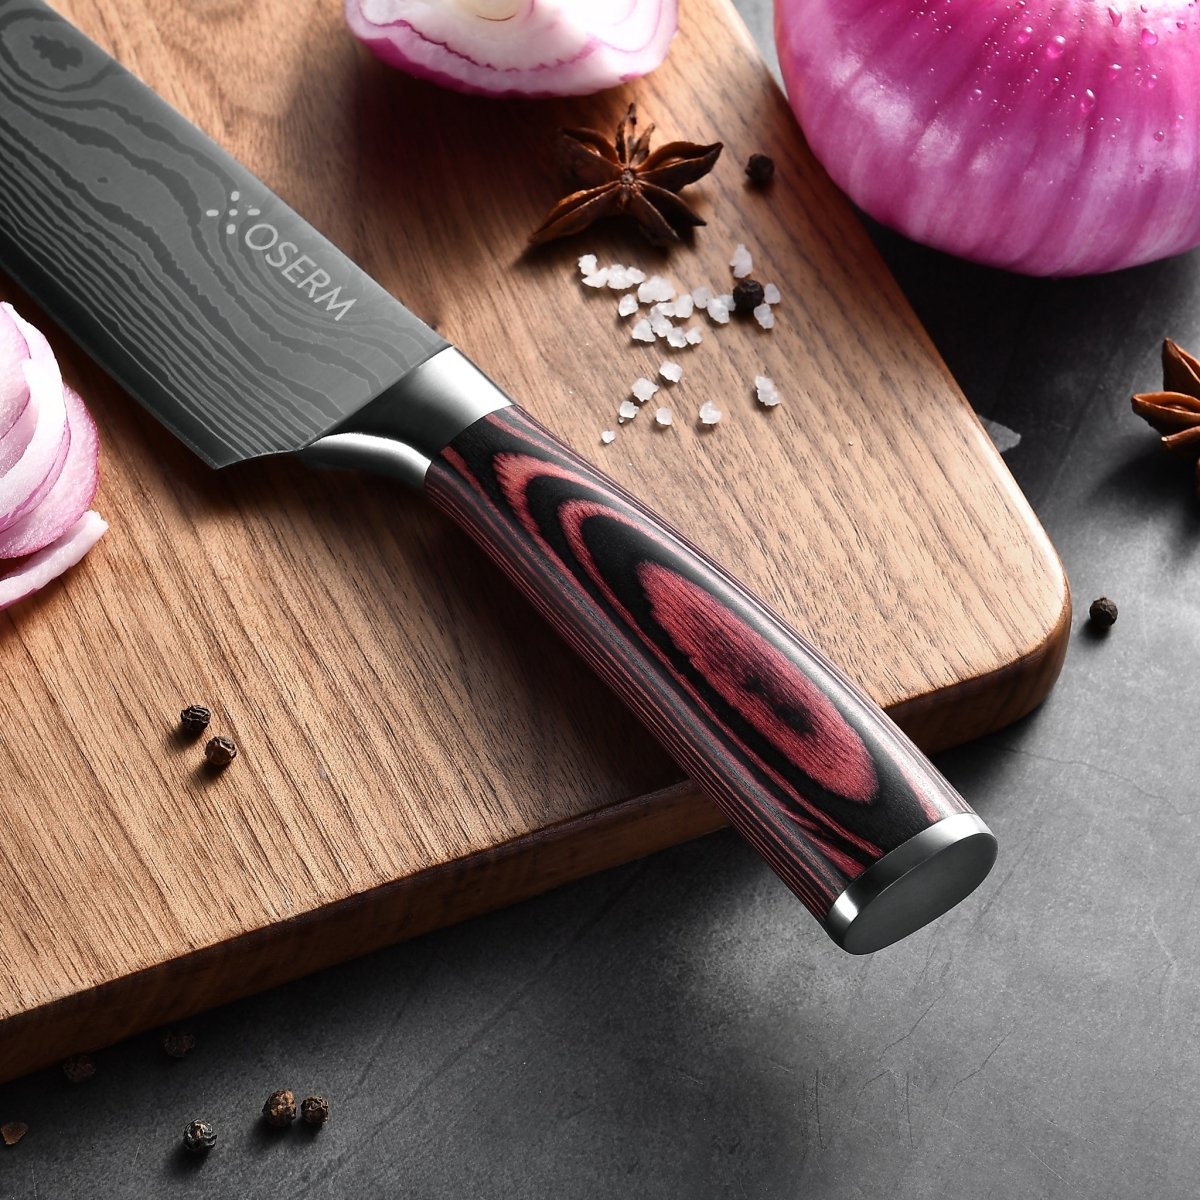 OSERM 3+1 Mystery Knife Set: Unveil Your Surprise with Premium High Carbon Stainless Steel Chef Knives & Exclusive Blind Box Bonus